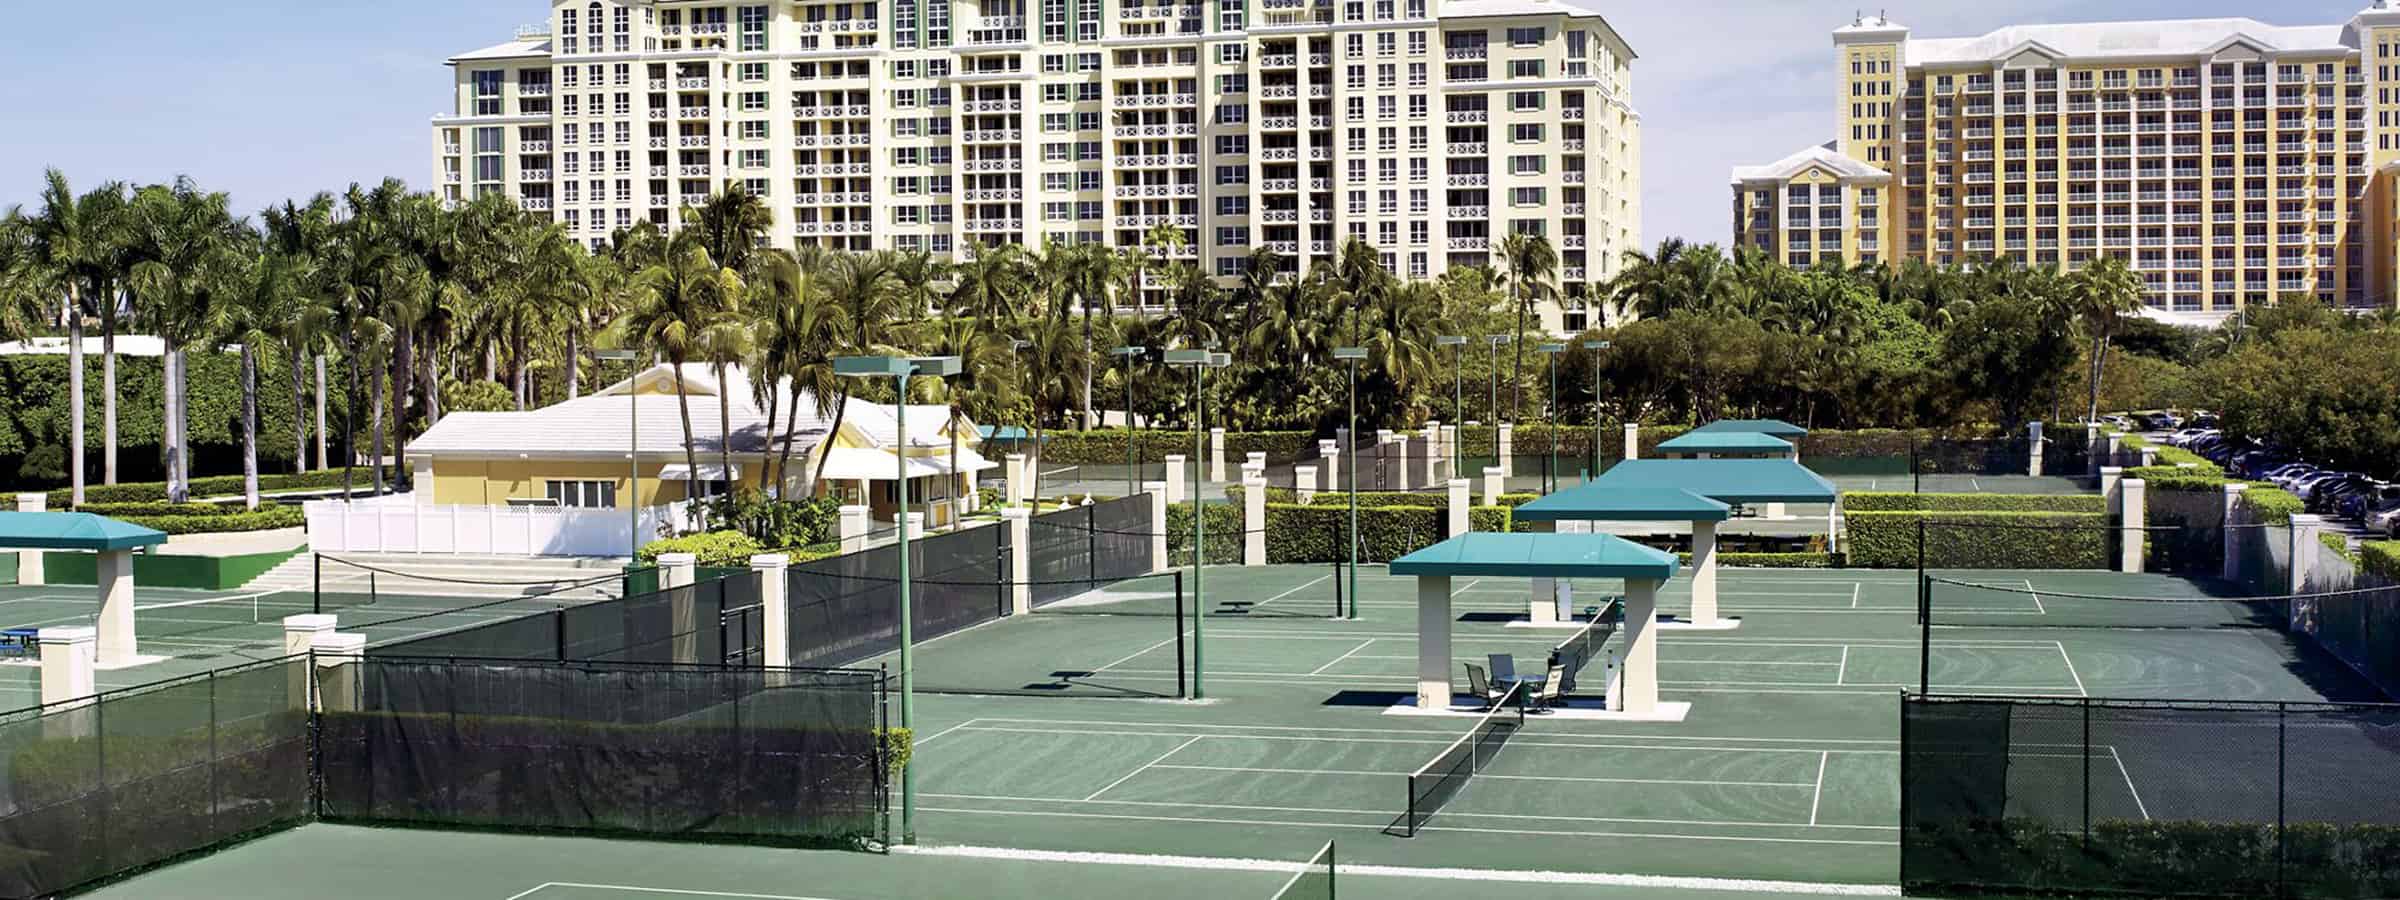 Tennis courts with office building in the background